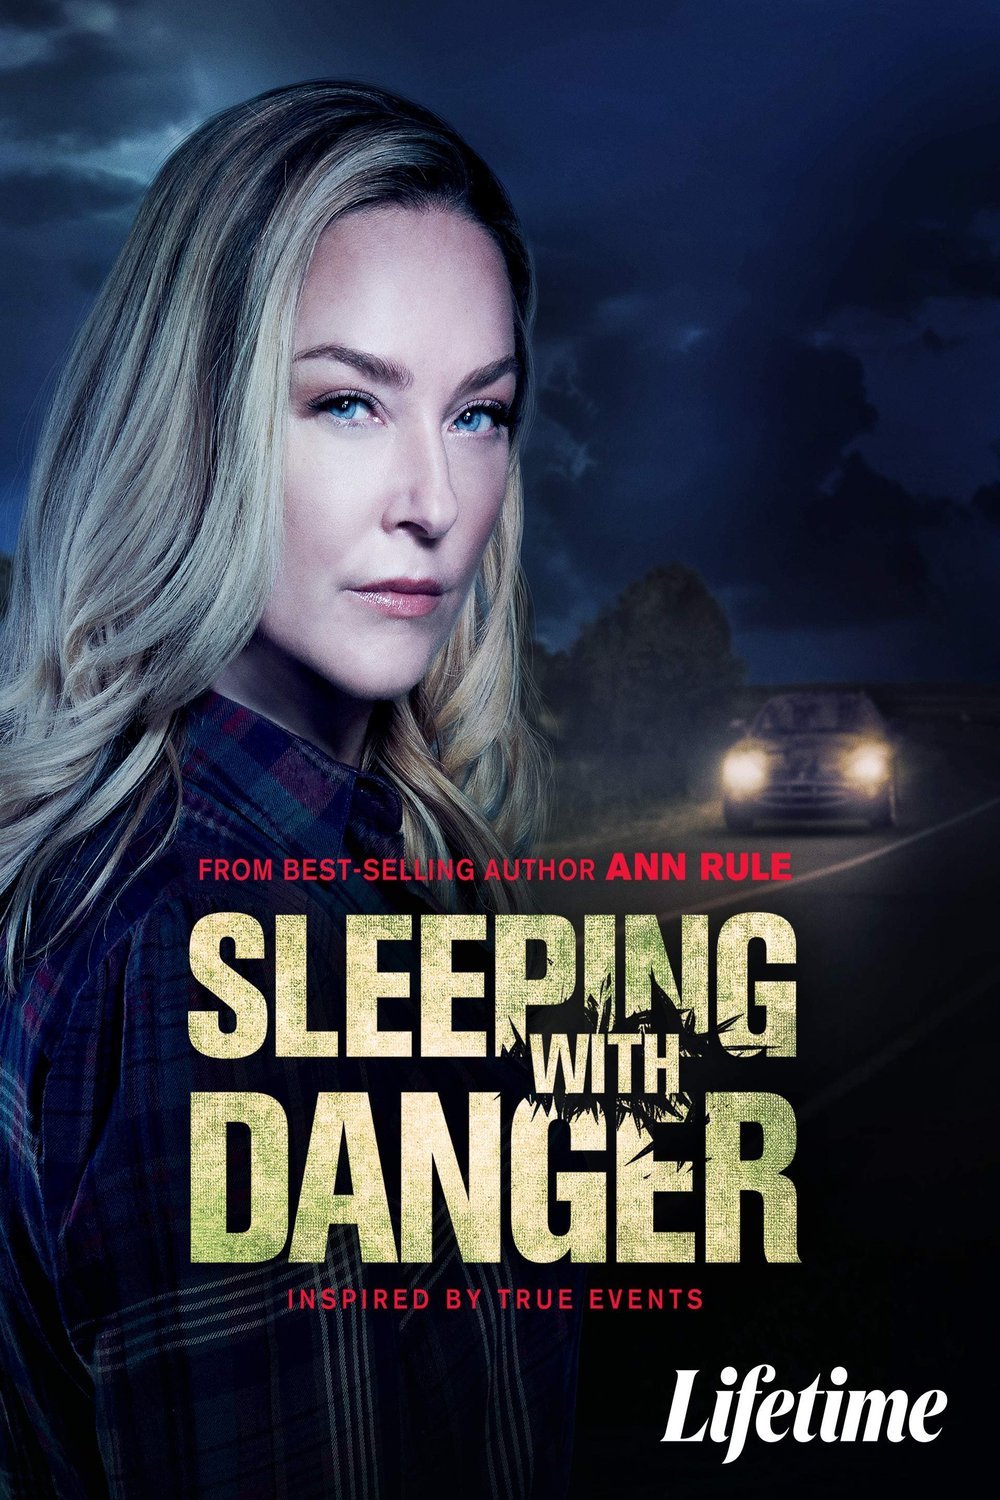 Poster of the movie Sleeping with Danger